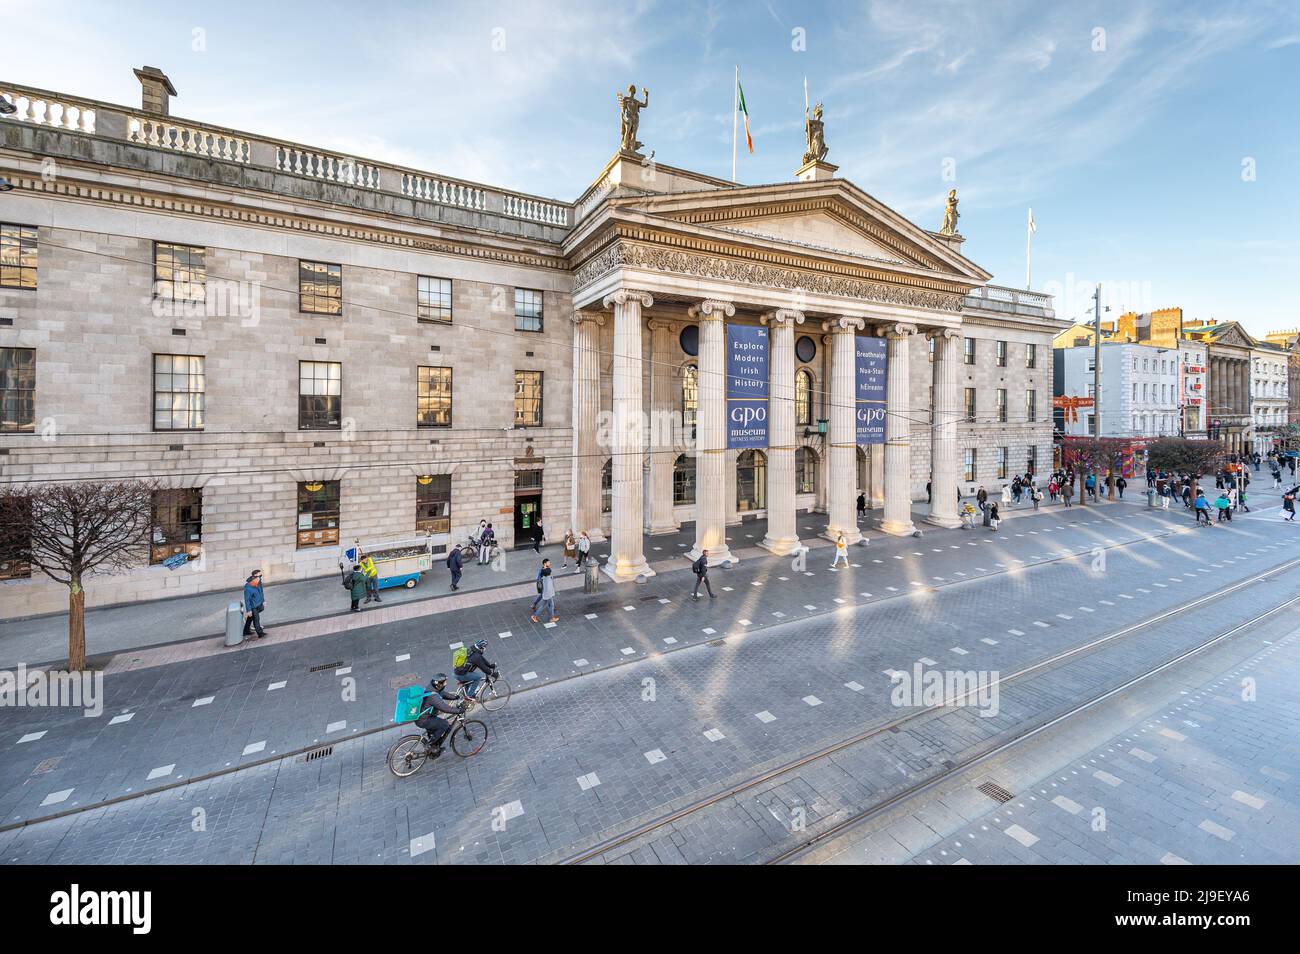 Luas tram passes in front of the GPO and Dublin Spire on a busy O'Connell Street, Dublin, Ireland Stock Photo